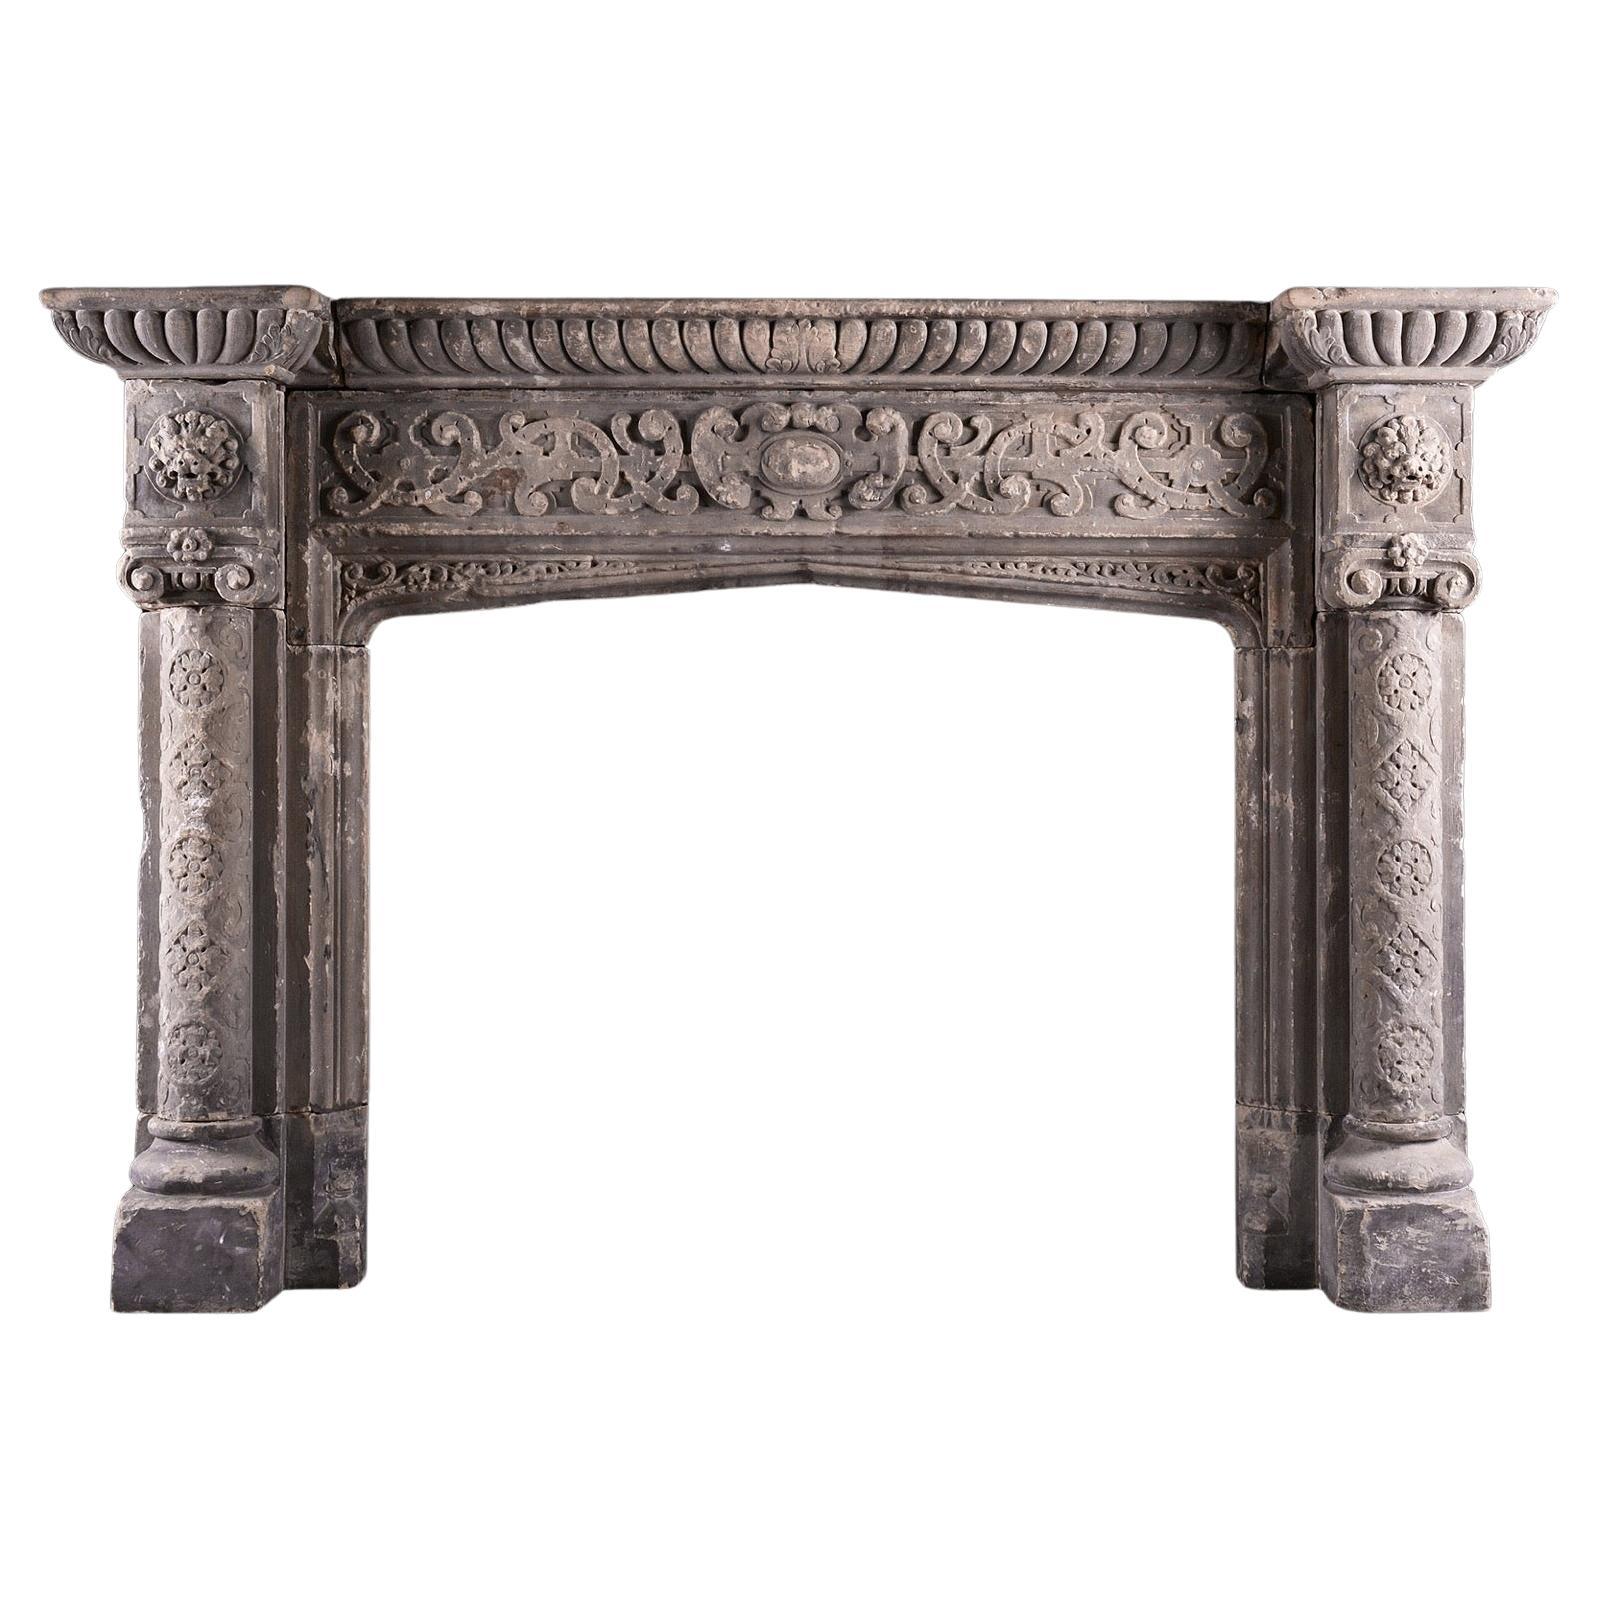 A Rustic Neo-Gothic Stone Fireplace